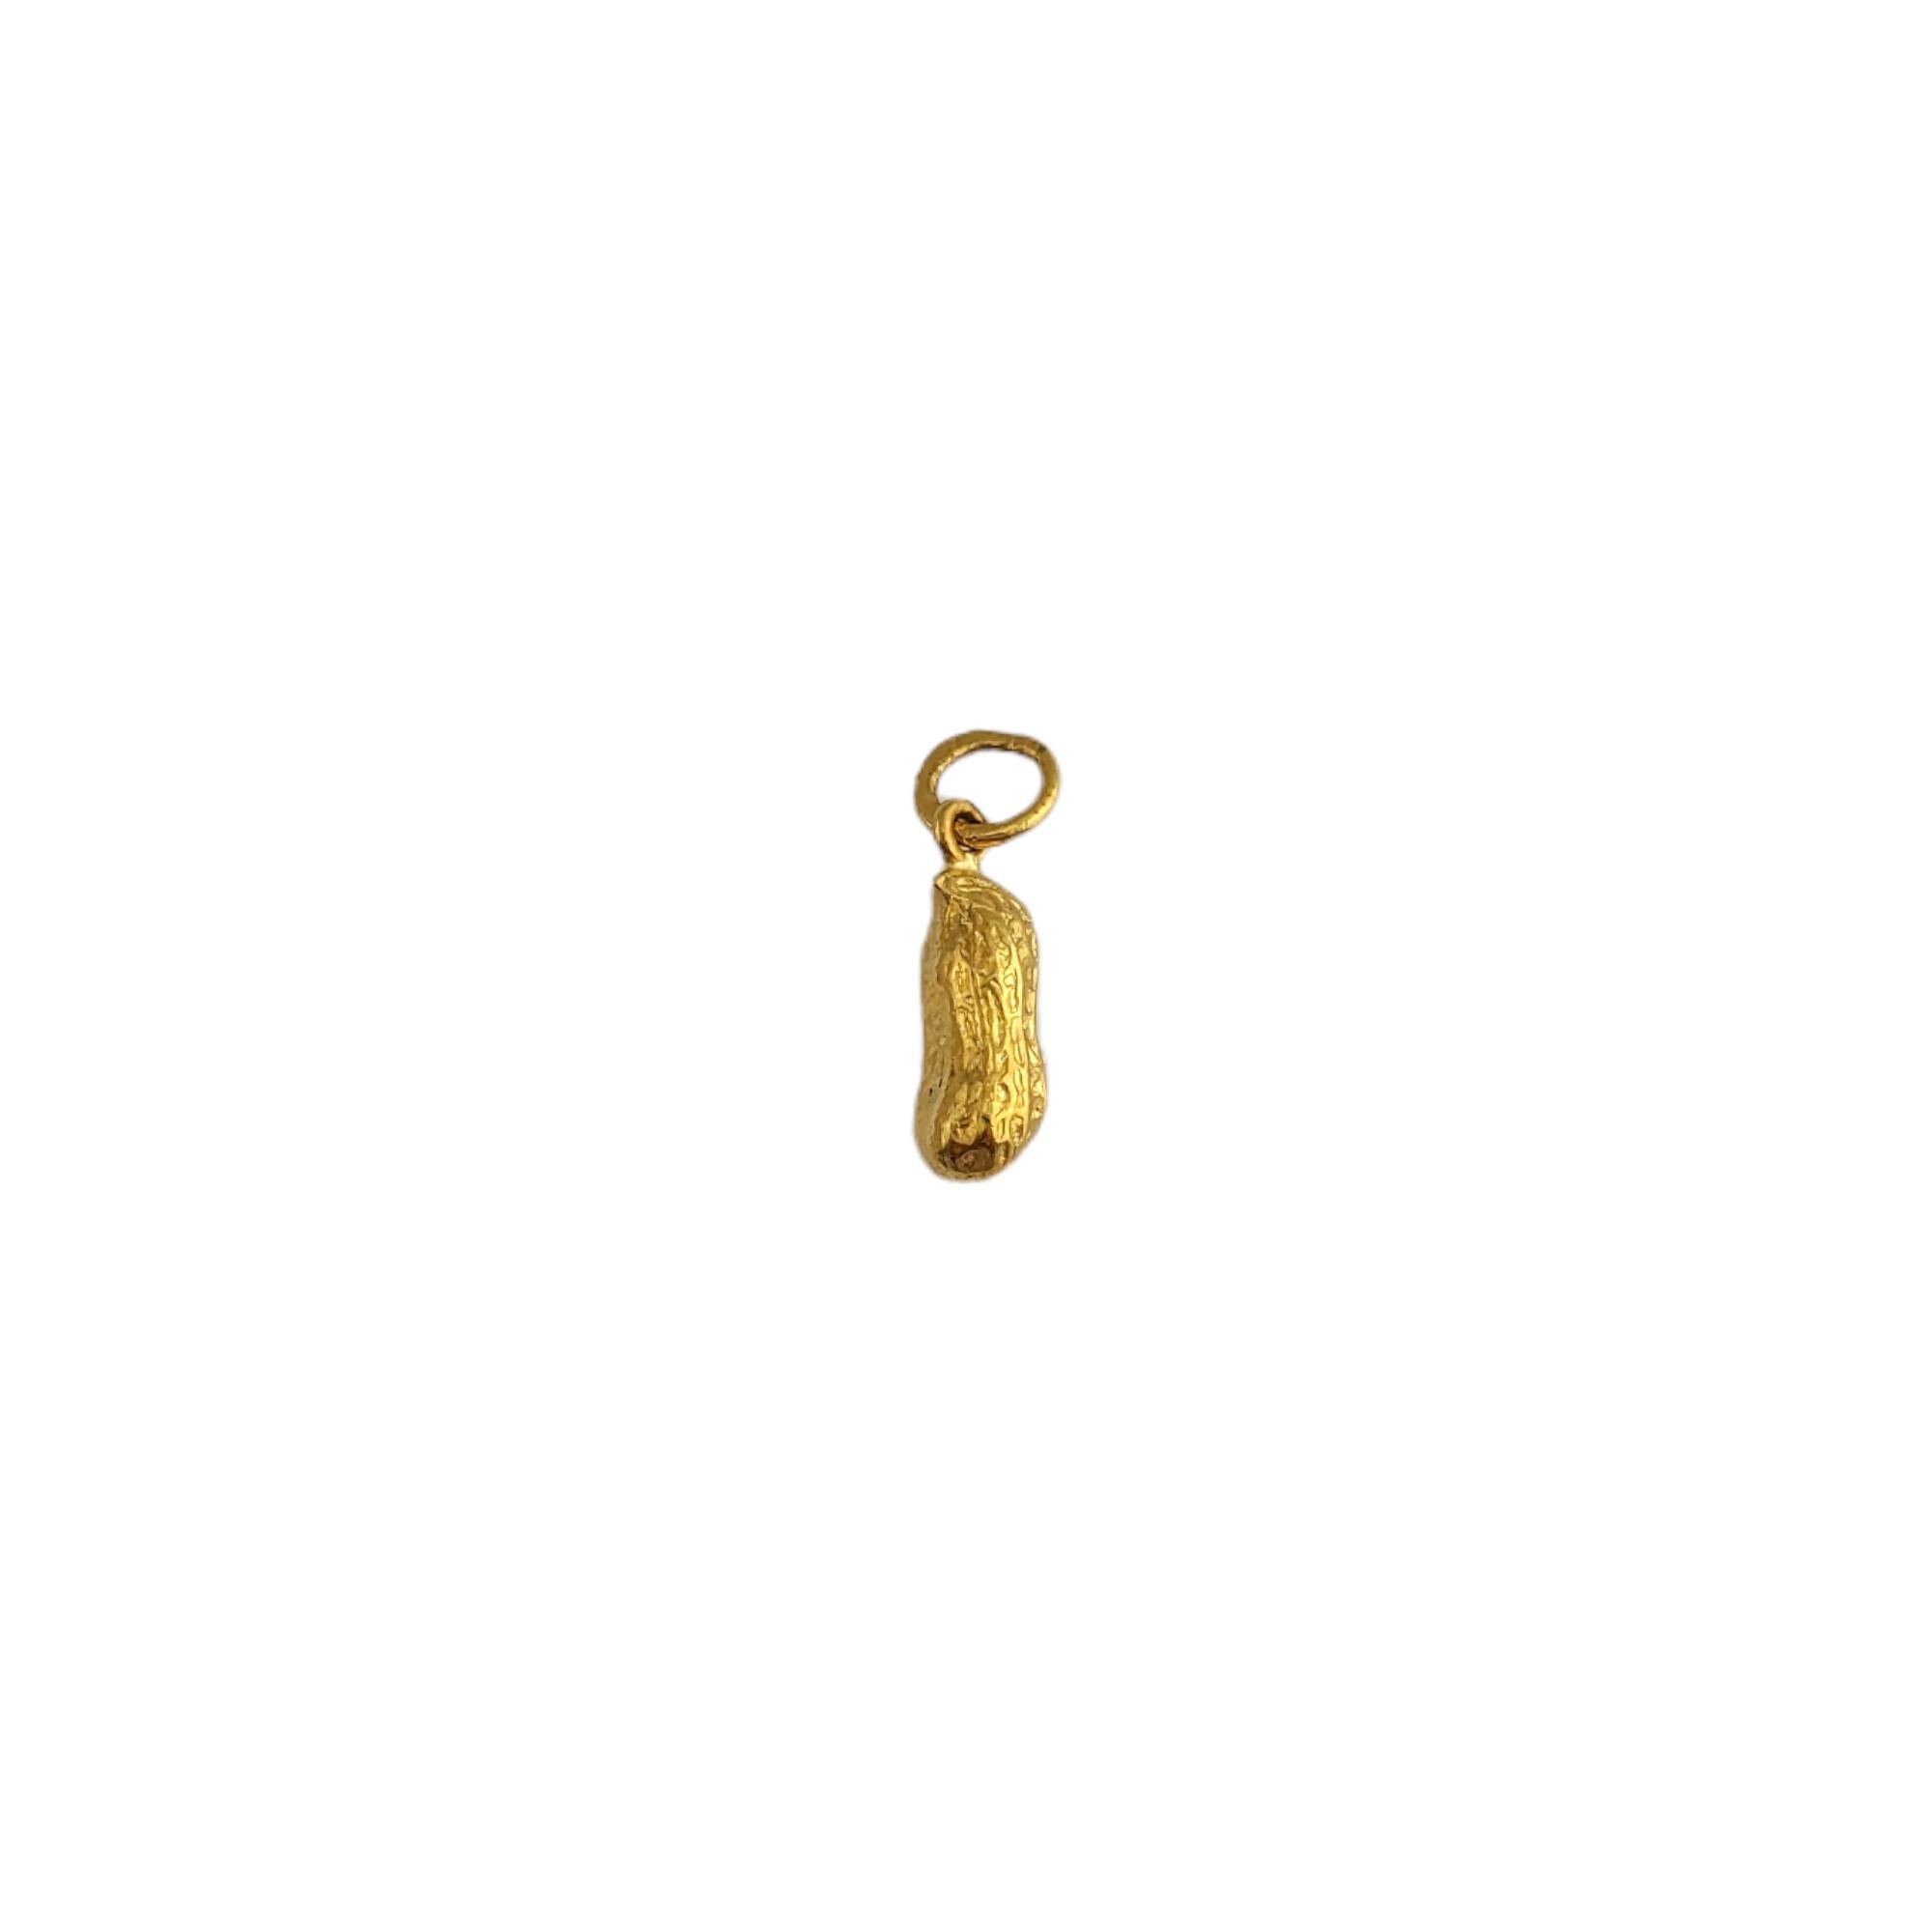 22K Yellow Gold Peanut Charm 

You'll love this cute yellow gold peanut charm! 

Size: 5.20mm X 17.19mm

Weight:  1.1gr /  0.7dwt

Very good condition, professionally polished.

Will come packaged in a gift box and will be shipped U.S. Priority Mail